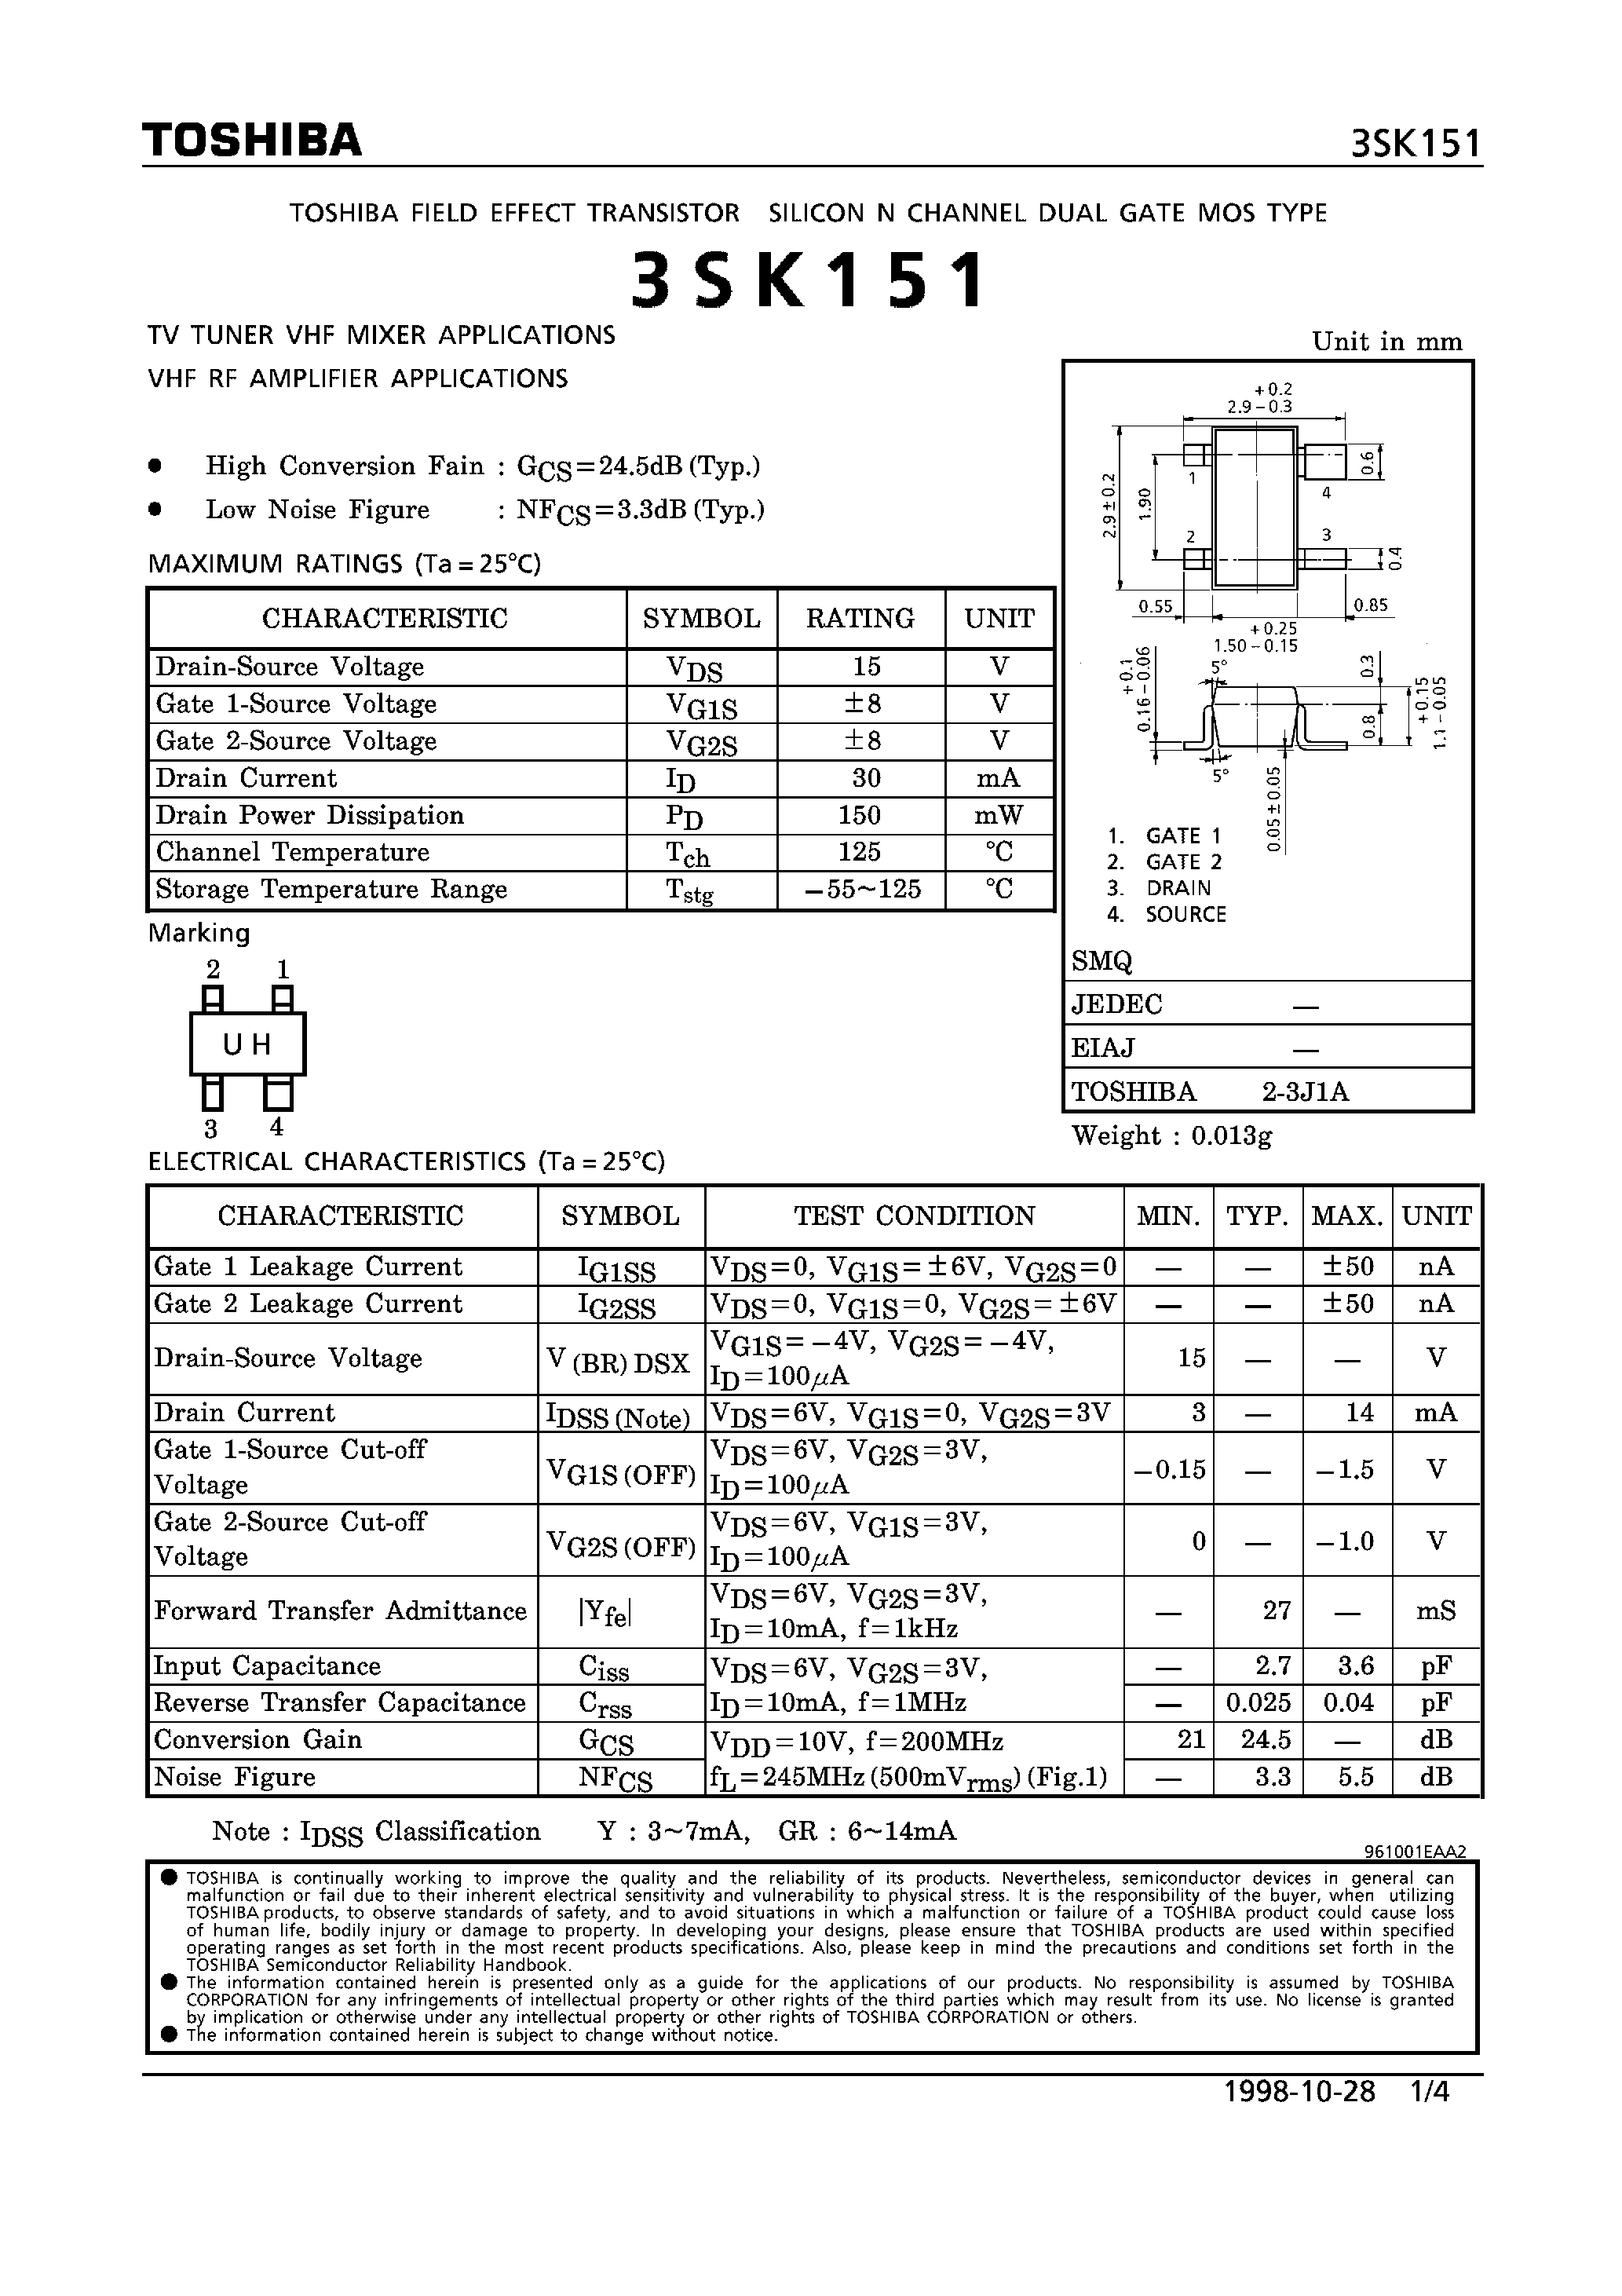 Datasheet 3SK151 - N CHANNEL DUAL GATE MOS TYPE (TV TYNER VHF MIXER/ VHF RF AMPLIFIER APPLICATIONS) page 1